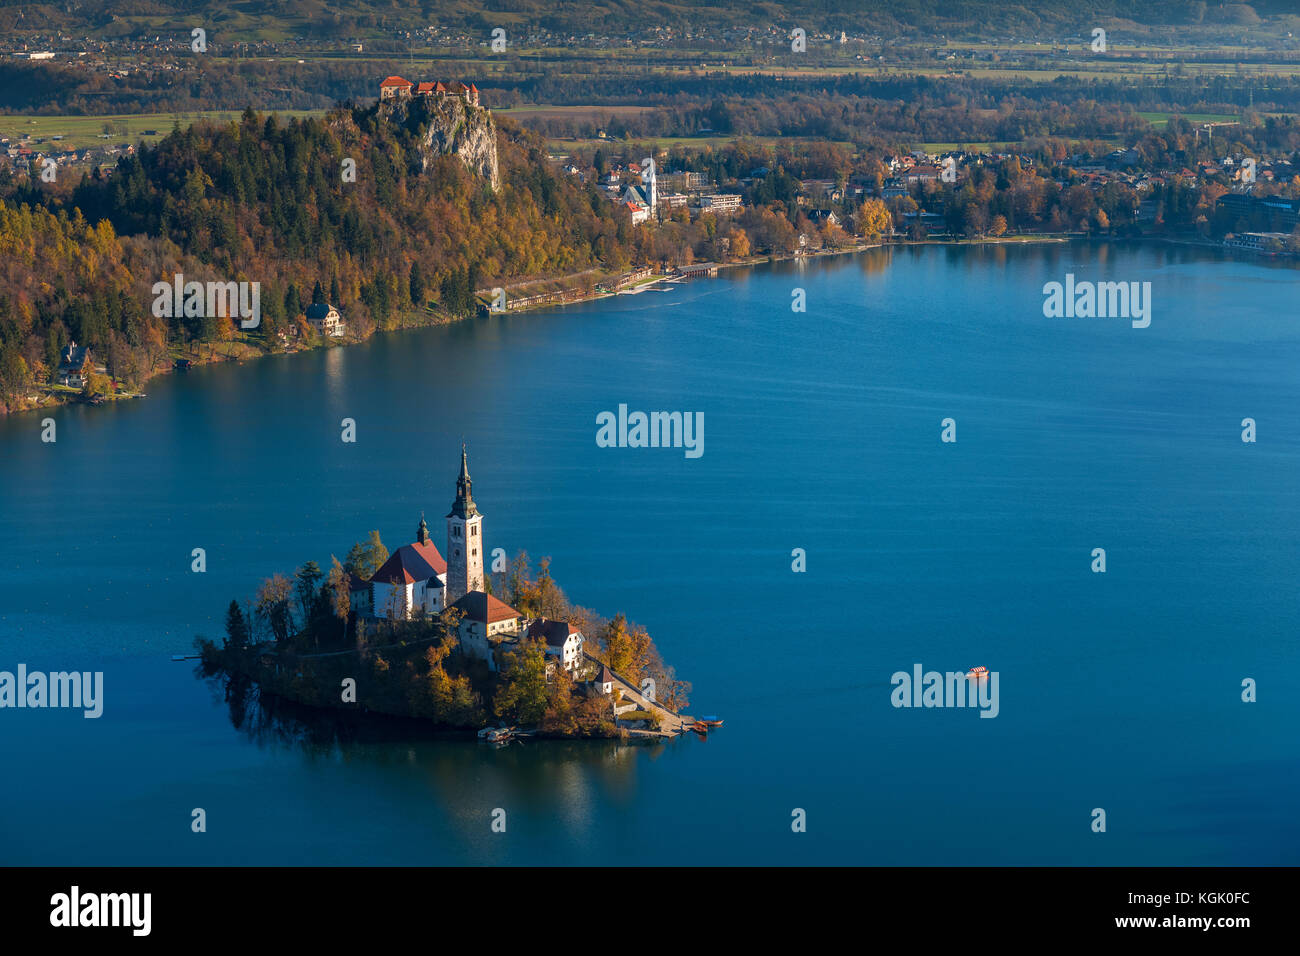 Bled, Slovenia - Sunrise at lake Bled taken from Osojnica viewpoint with traditional Pletna boat and Bled Castle at background at autumn Stock Photo